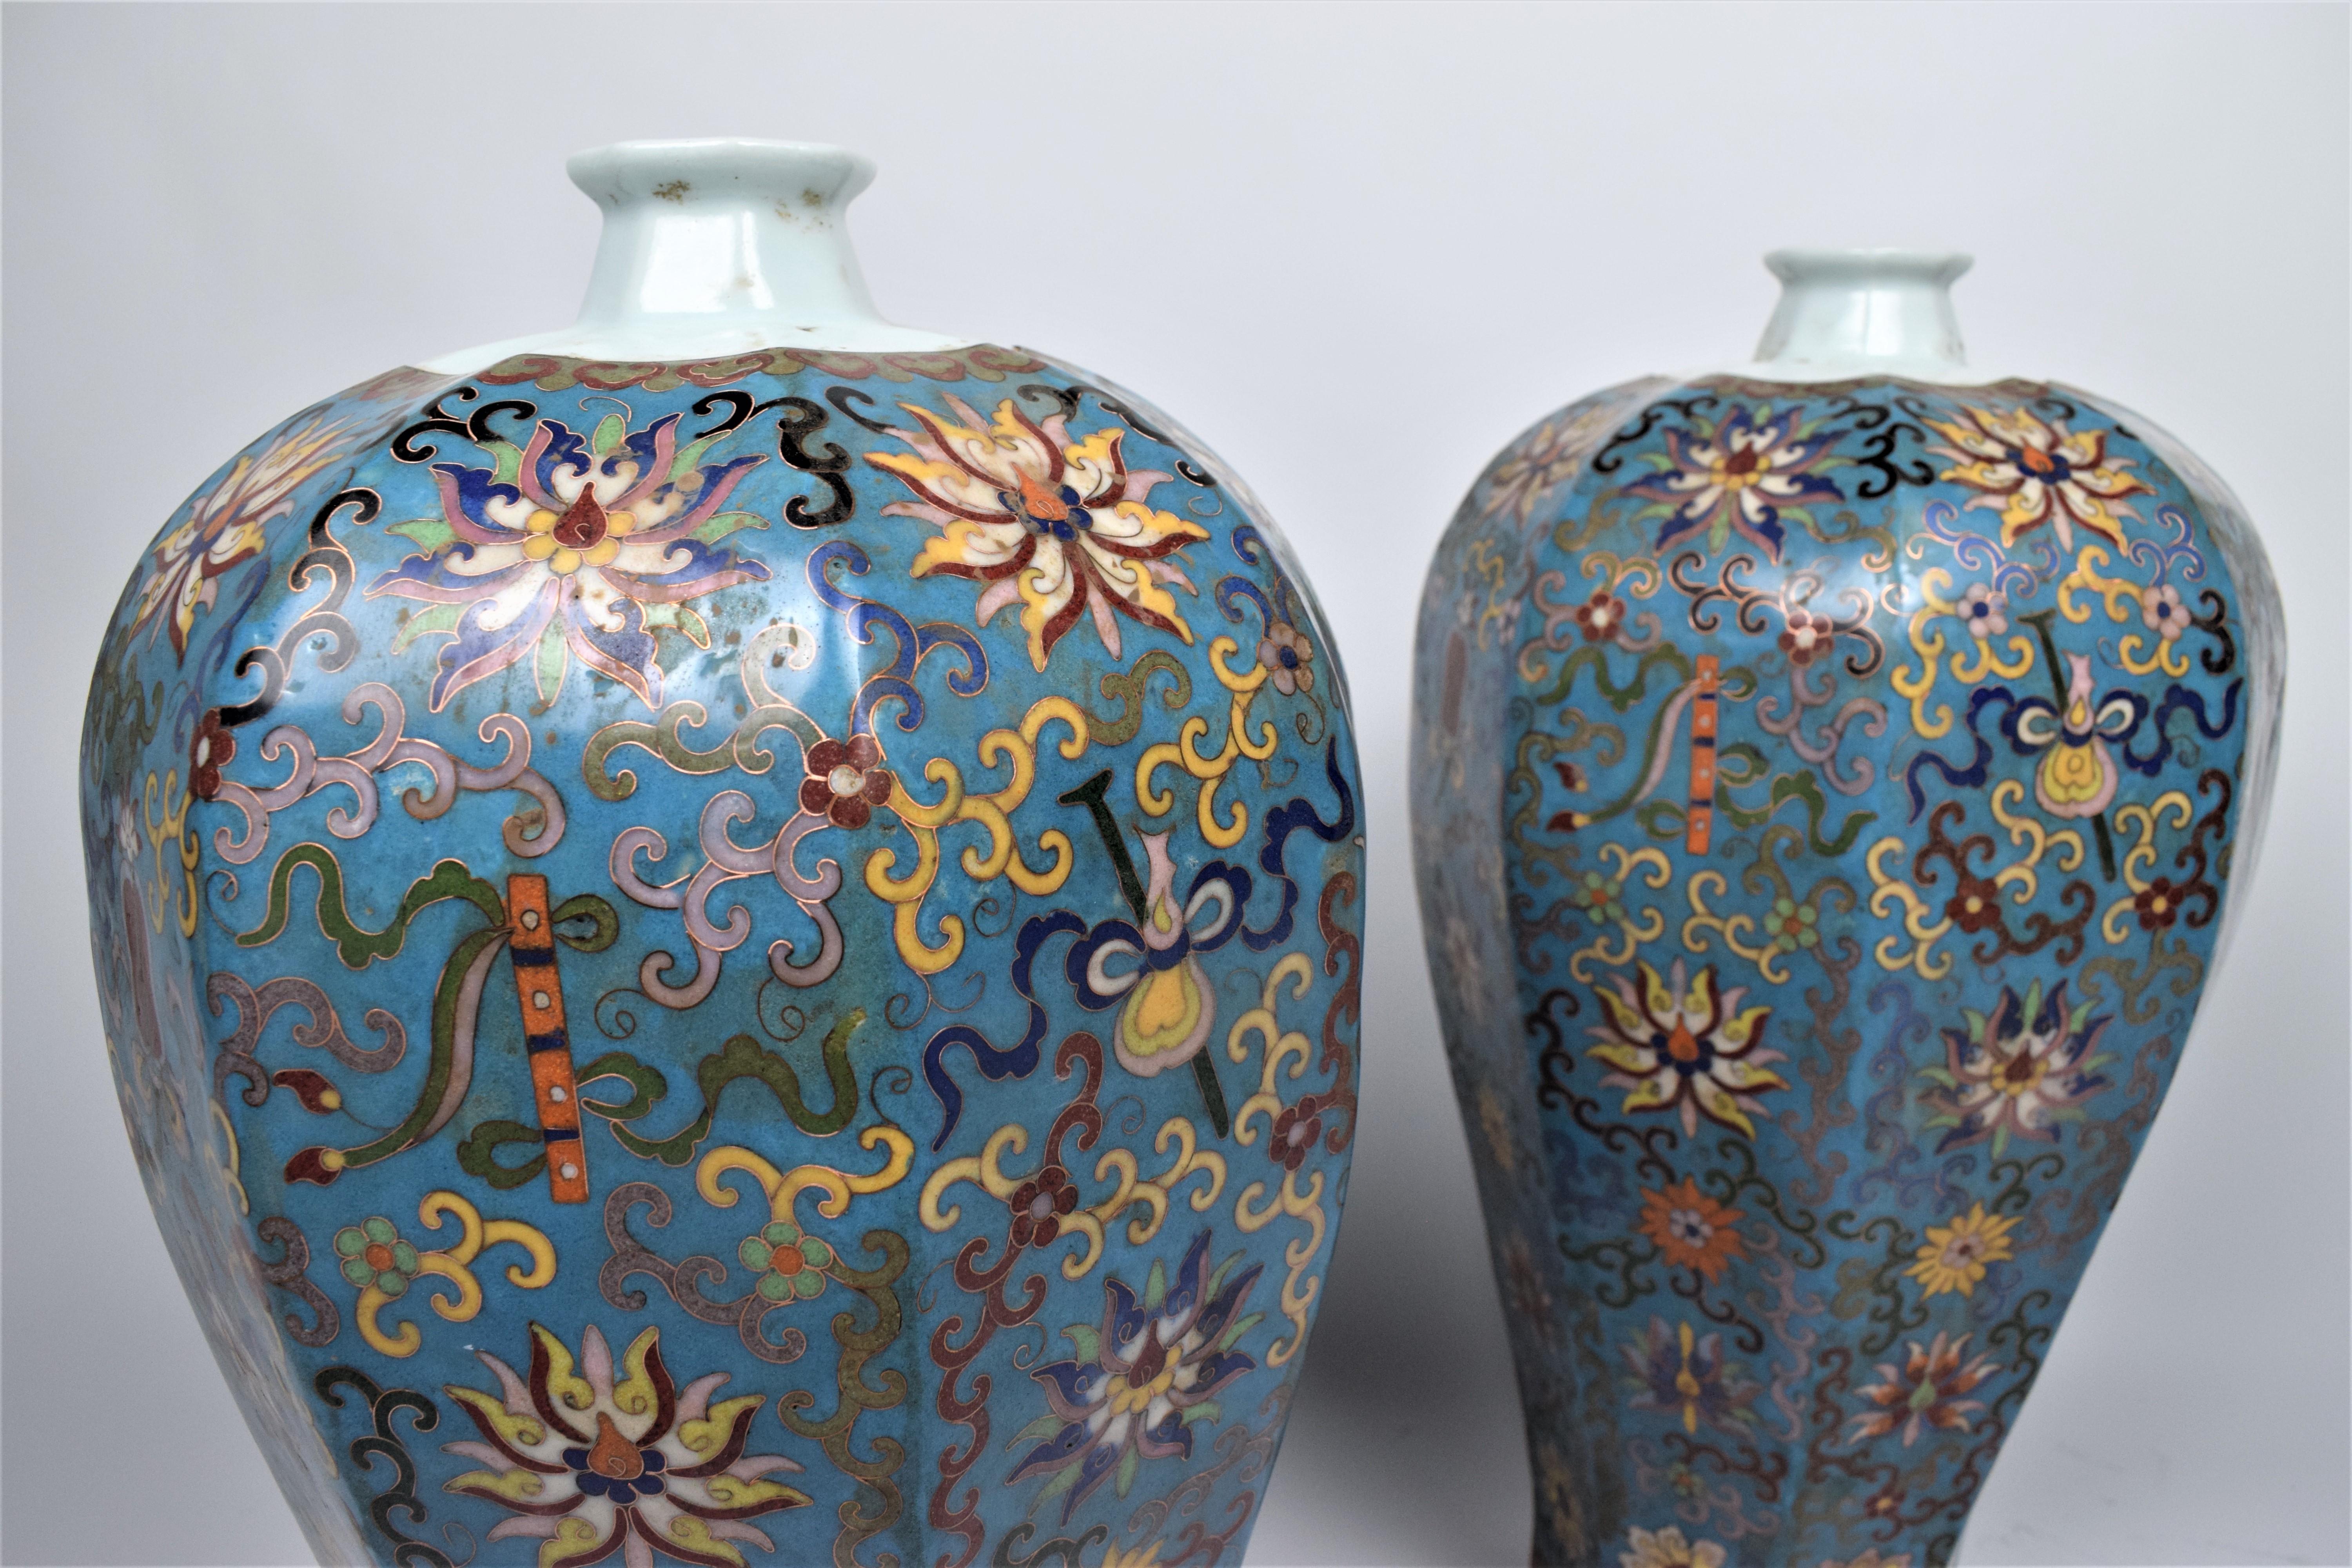 Ceramic Chinese Large Cloisonné Enamel Bottle Vases Late Qing Dynasty, 19th Century For Sale